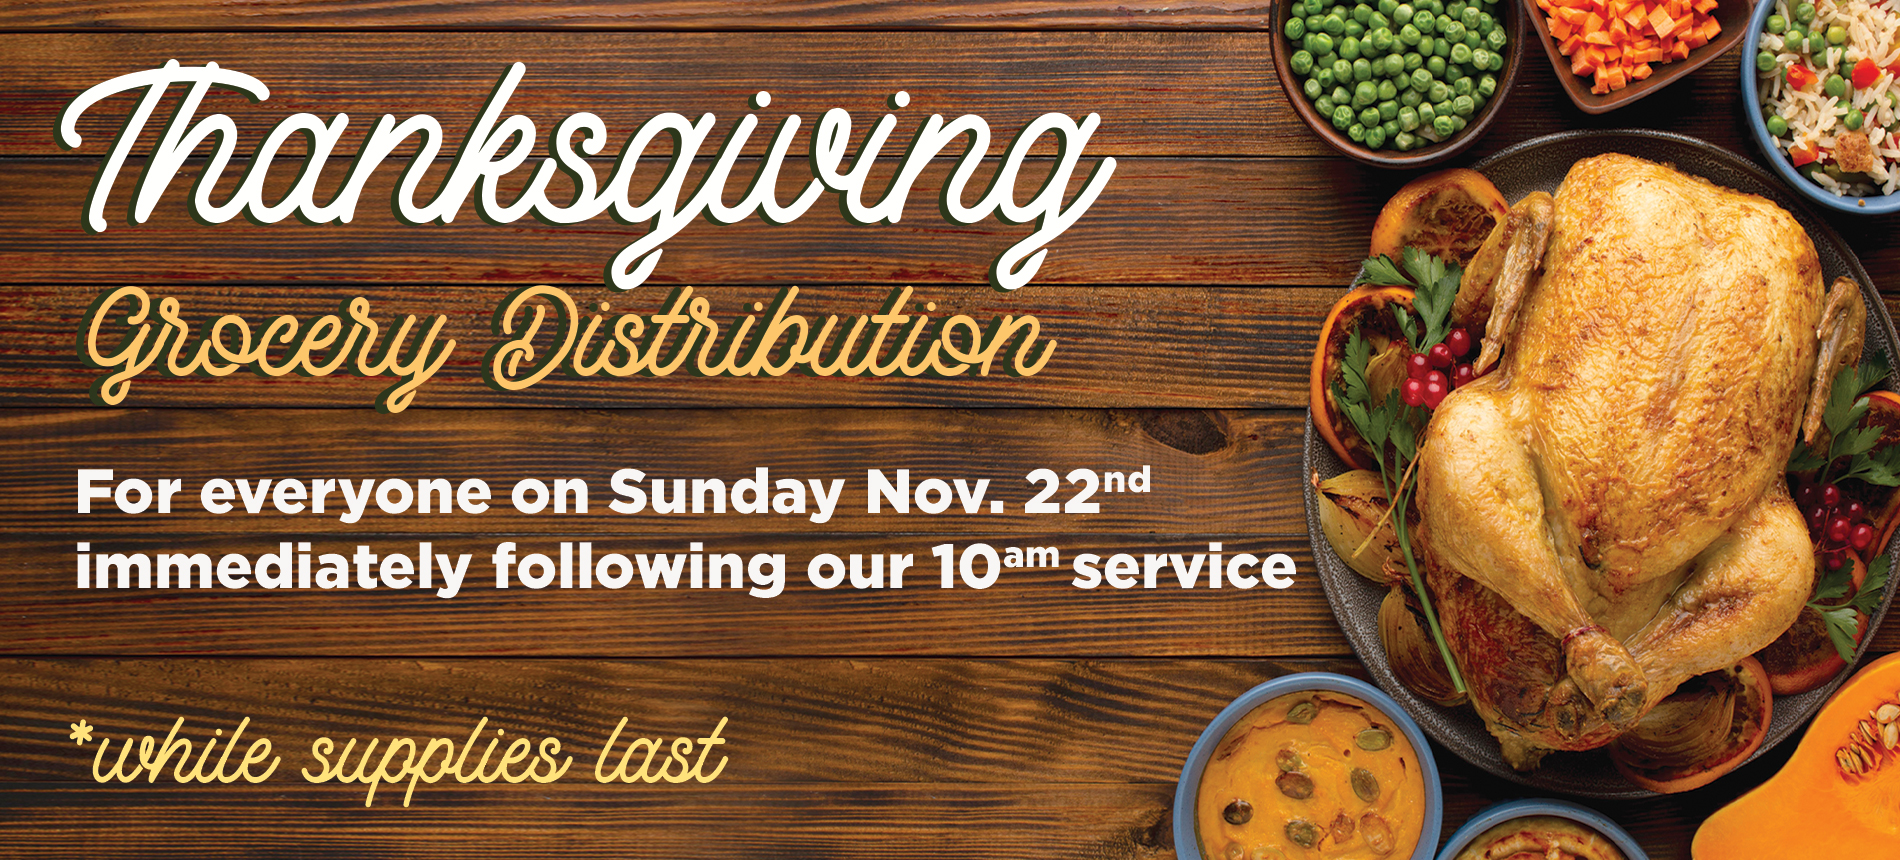 Thanksgiving Grocery Distribution For Everyone on Sunday Nov. 22nd Immediately following our 10am service while supplies last.